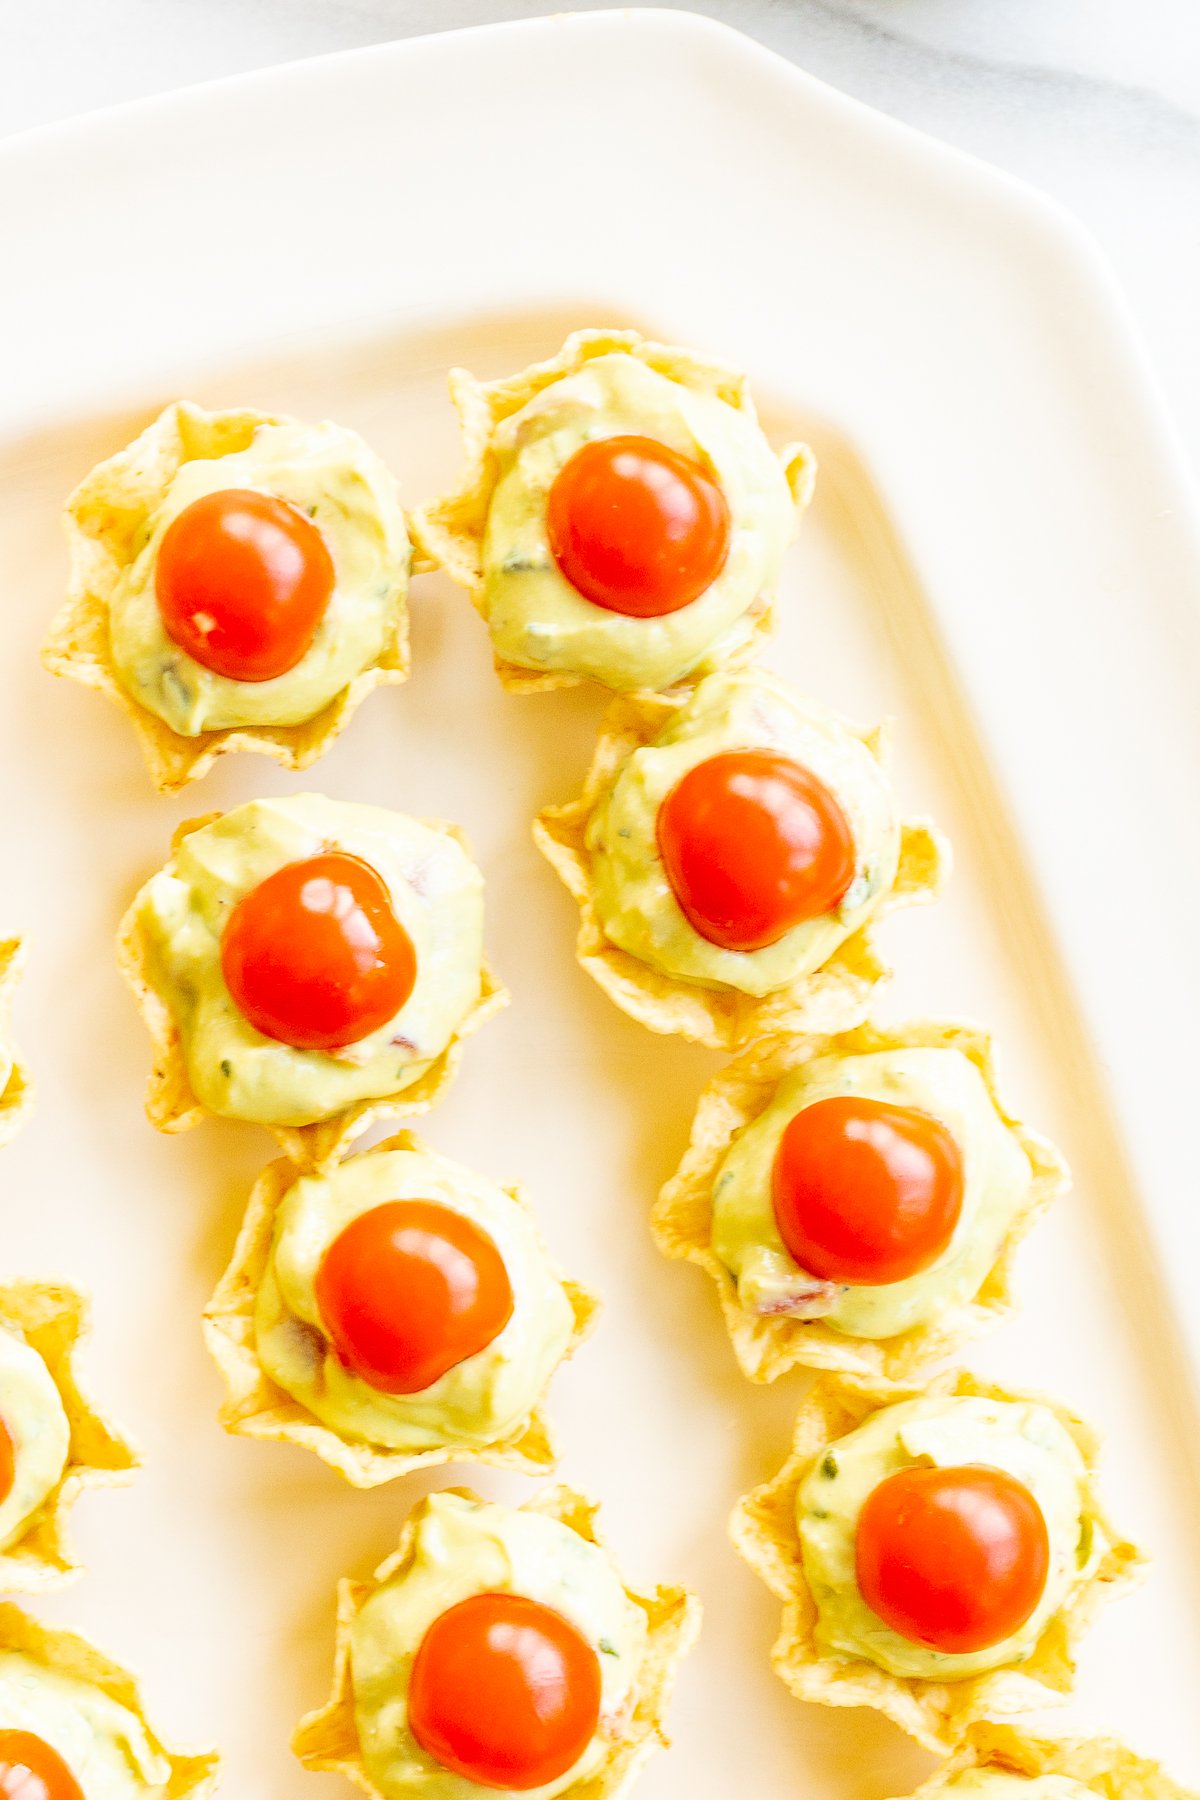 A white tray full of guacamole bites made from tortilla chips, topped with sliced cherry tomatoes.